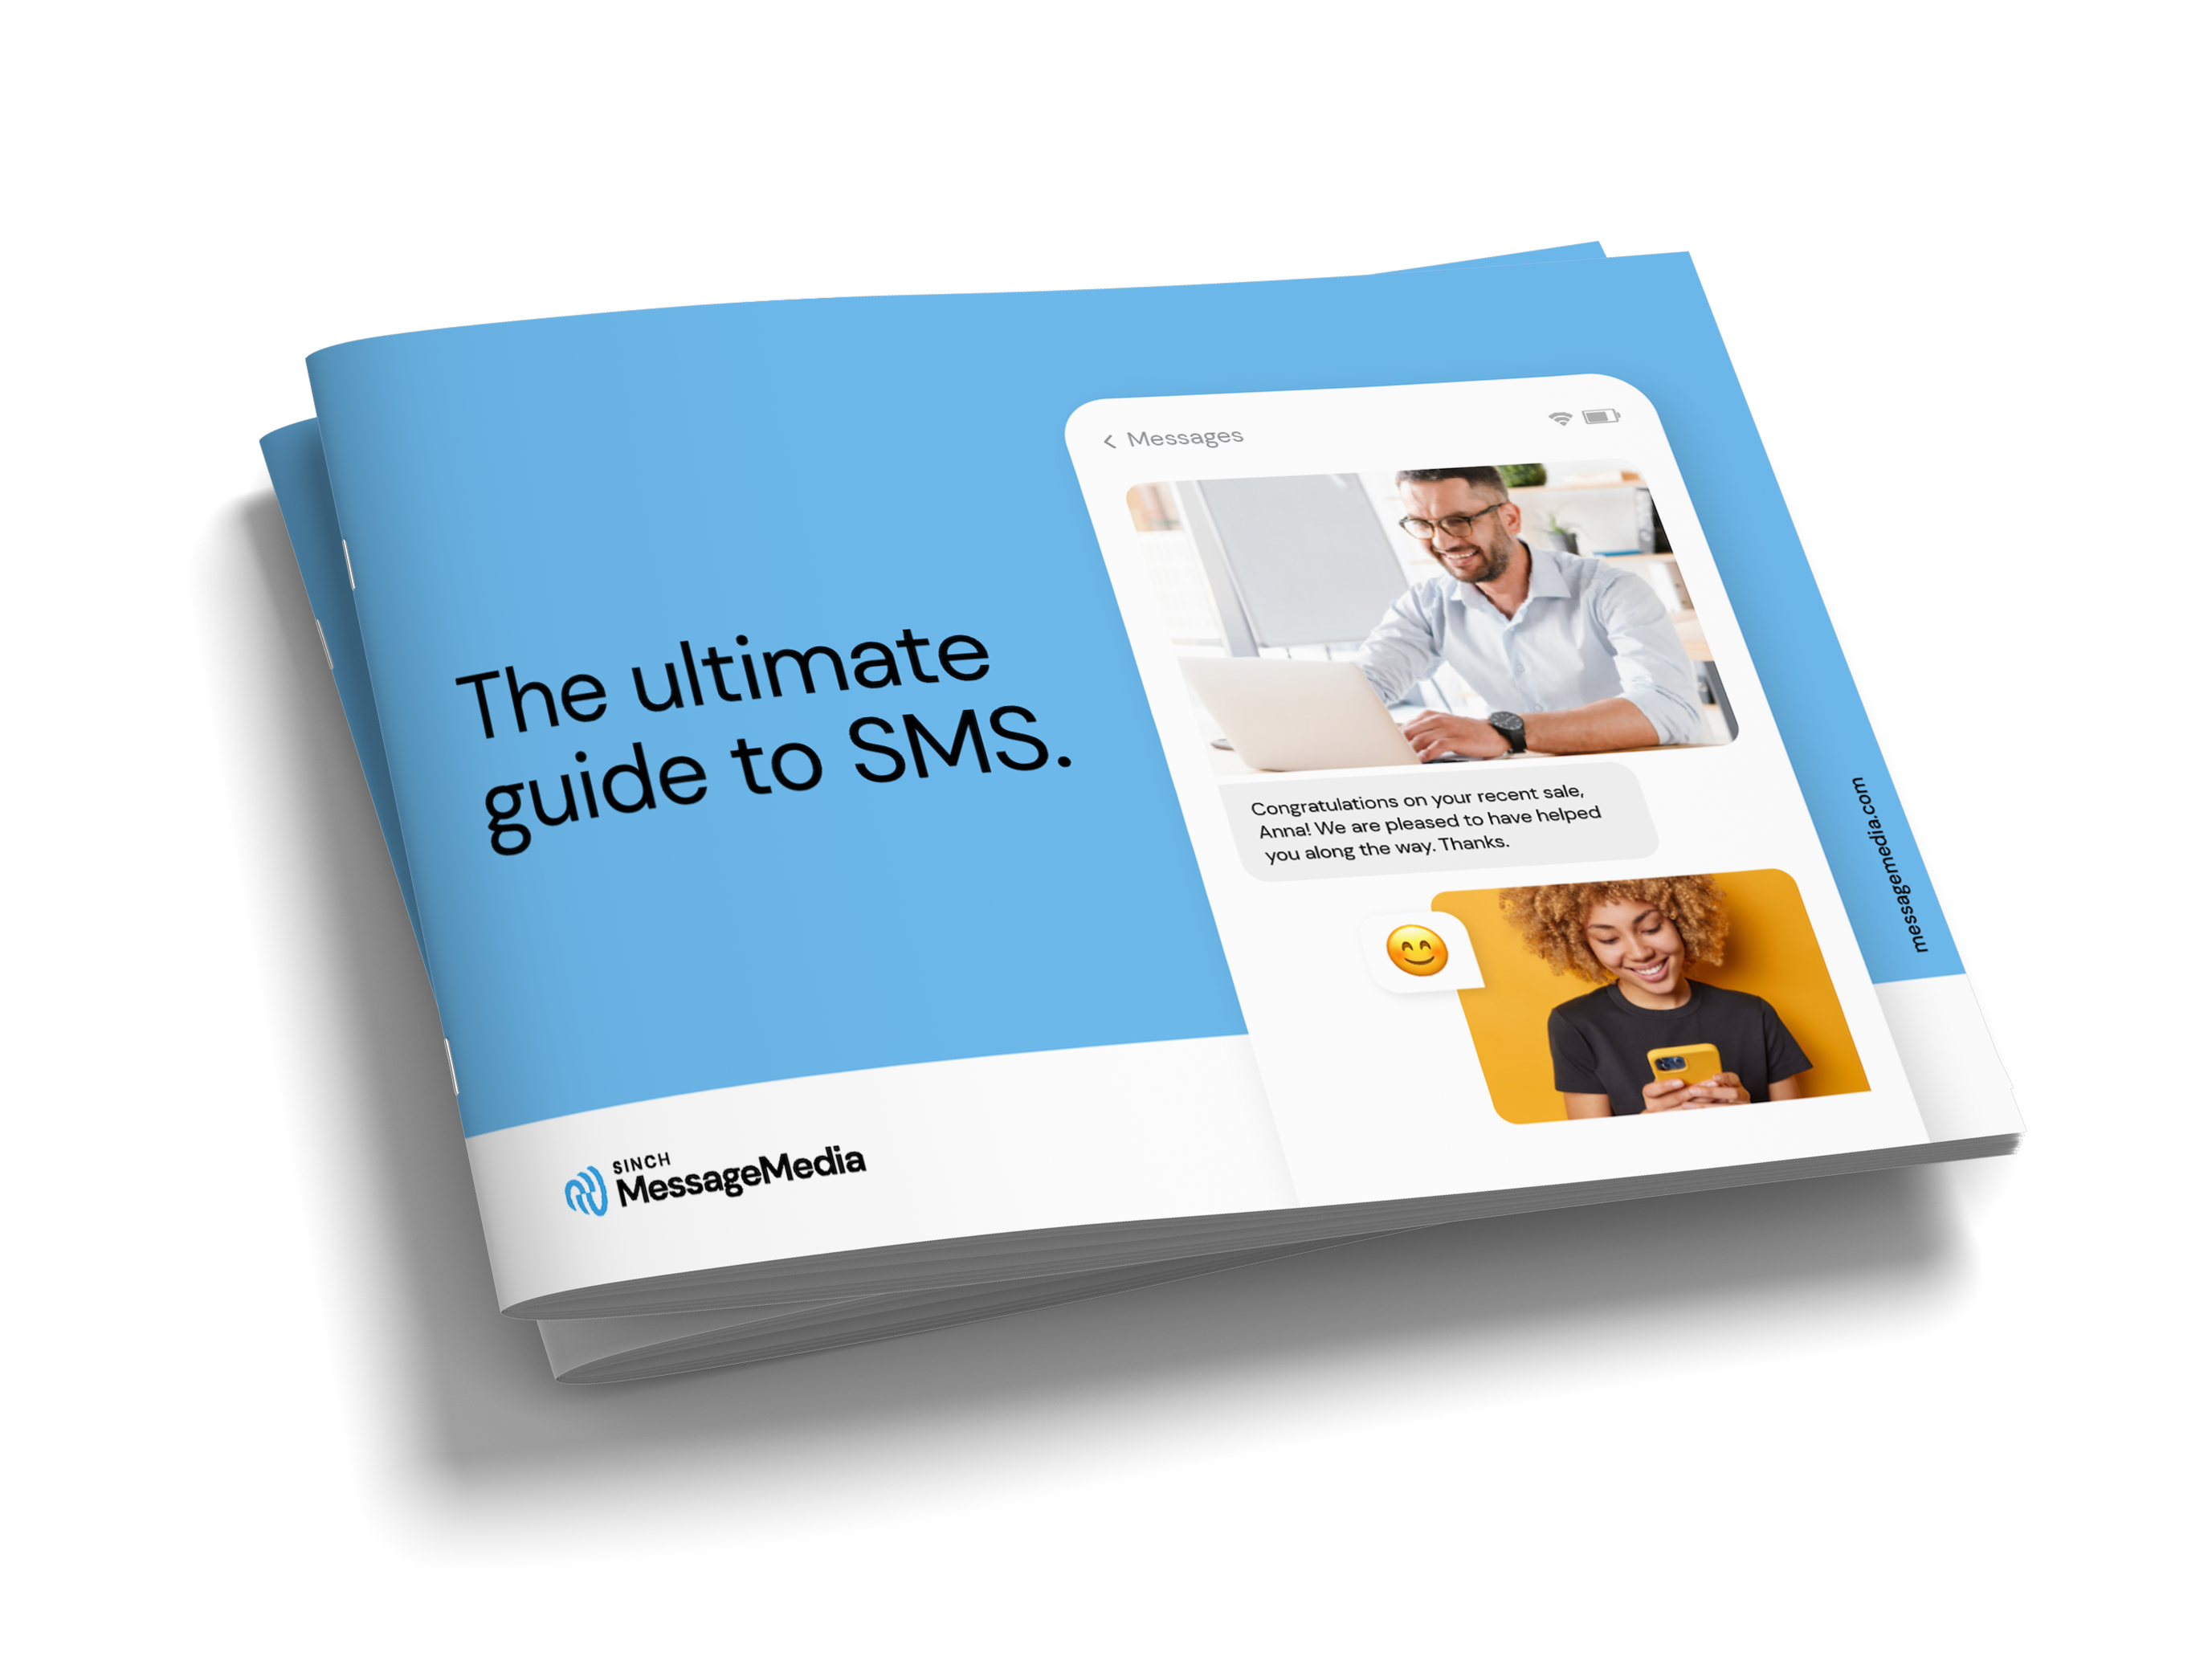 The ultimate guide to SMS ebook